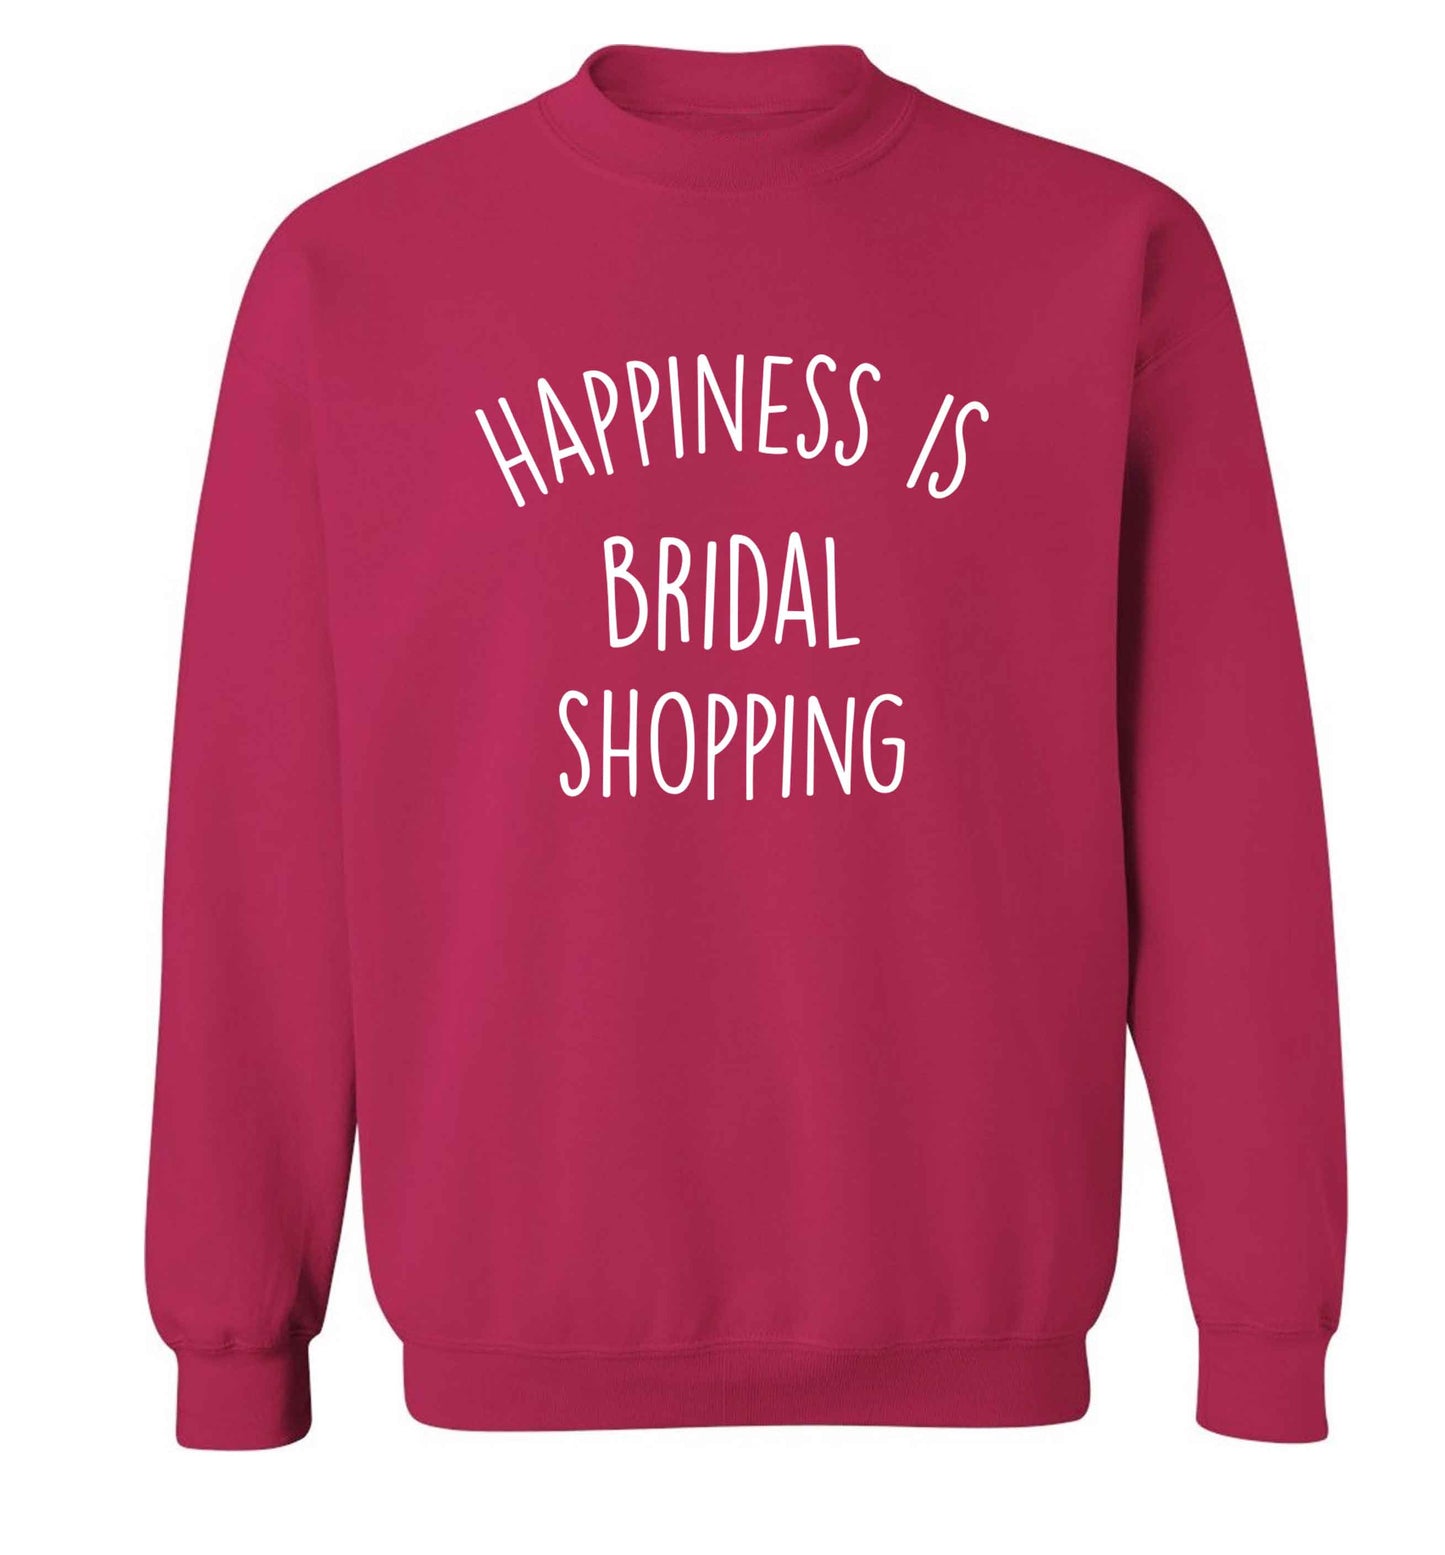 Happiness is bridal shopping adult's unisex pink sweater 2XL